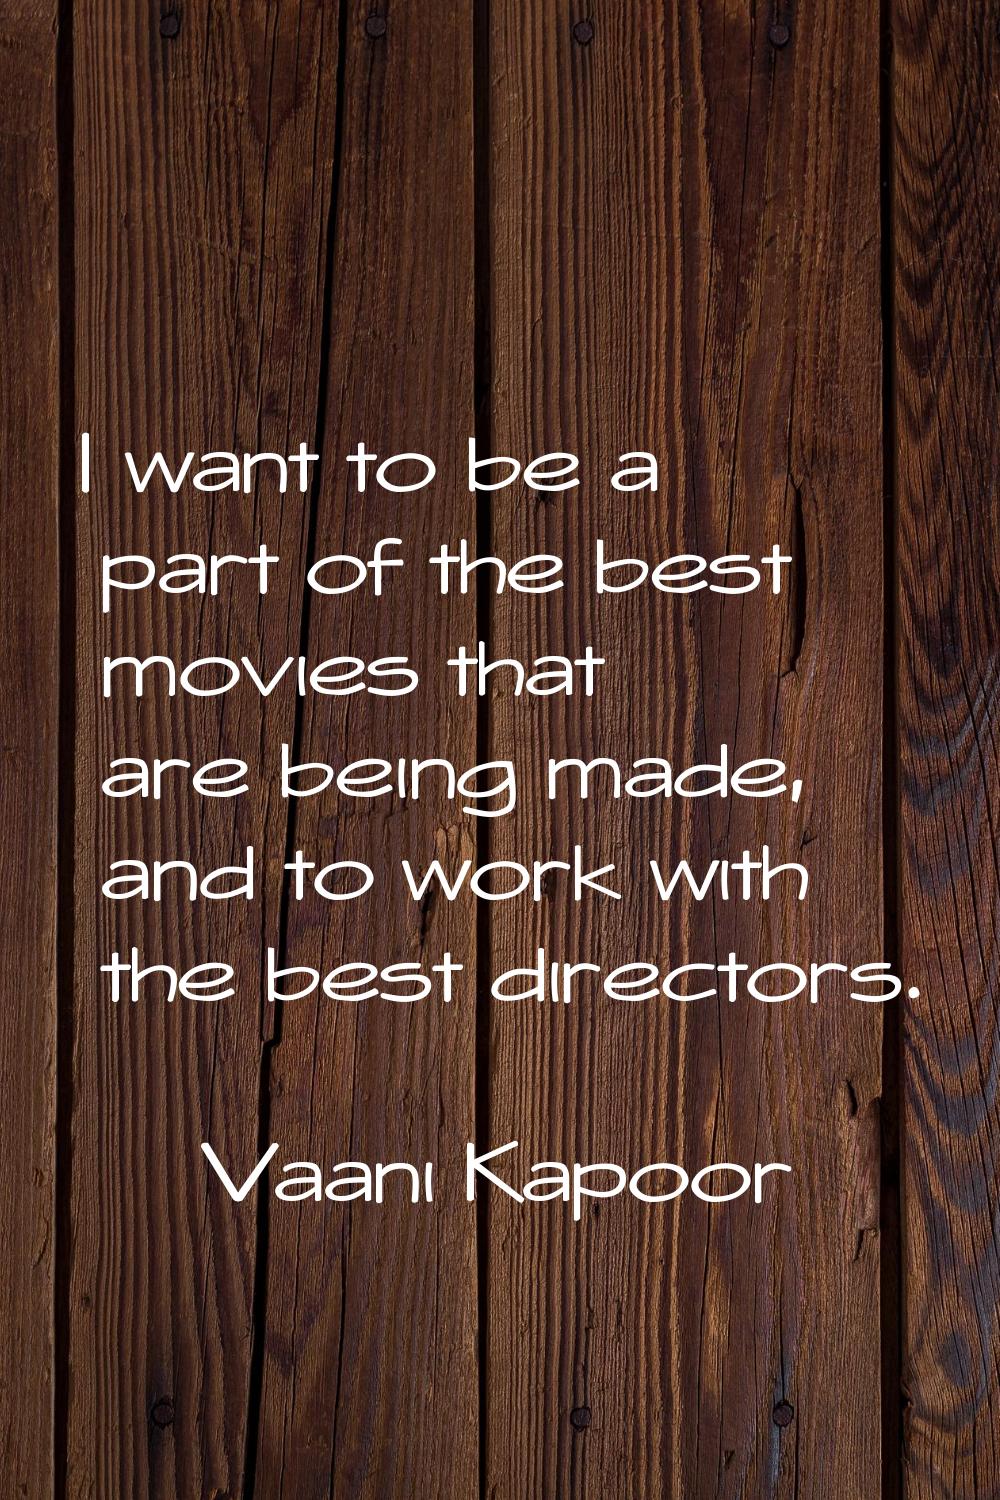 I want to be a part of the best movies that are being made, and to work with the best directors.